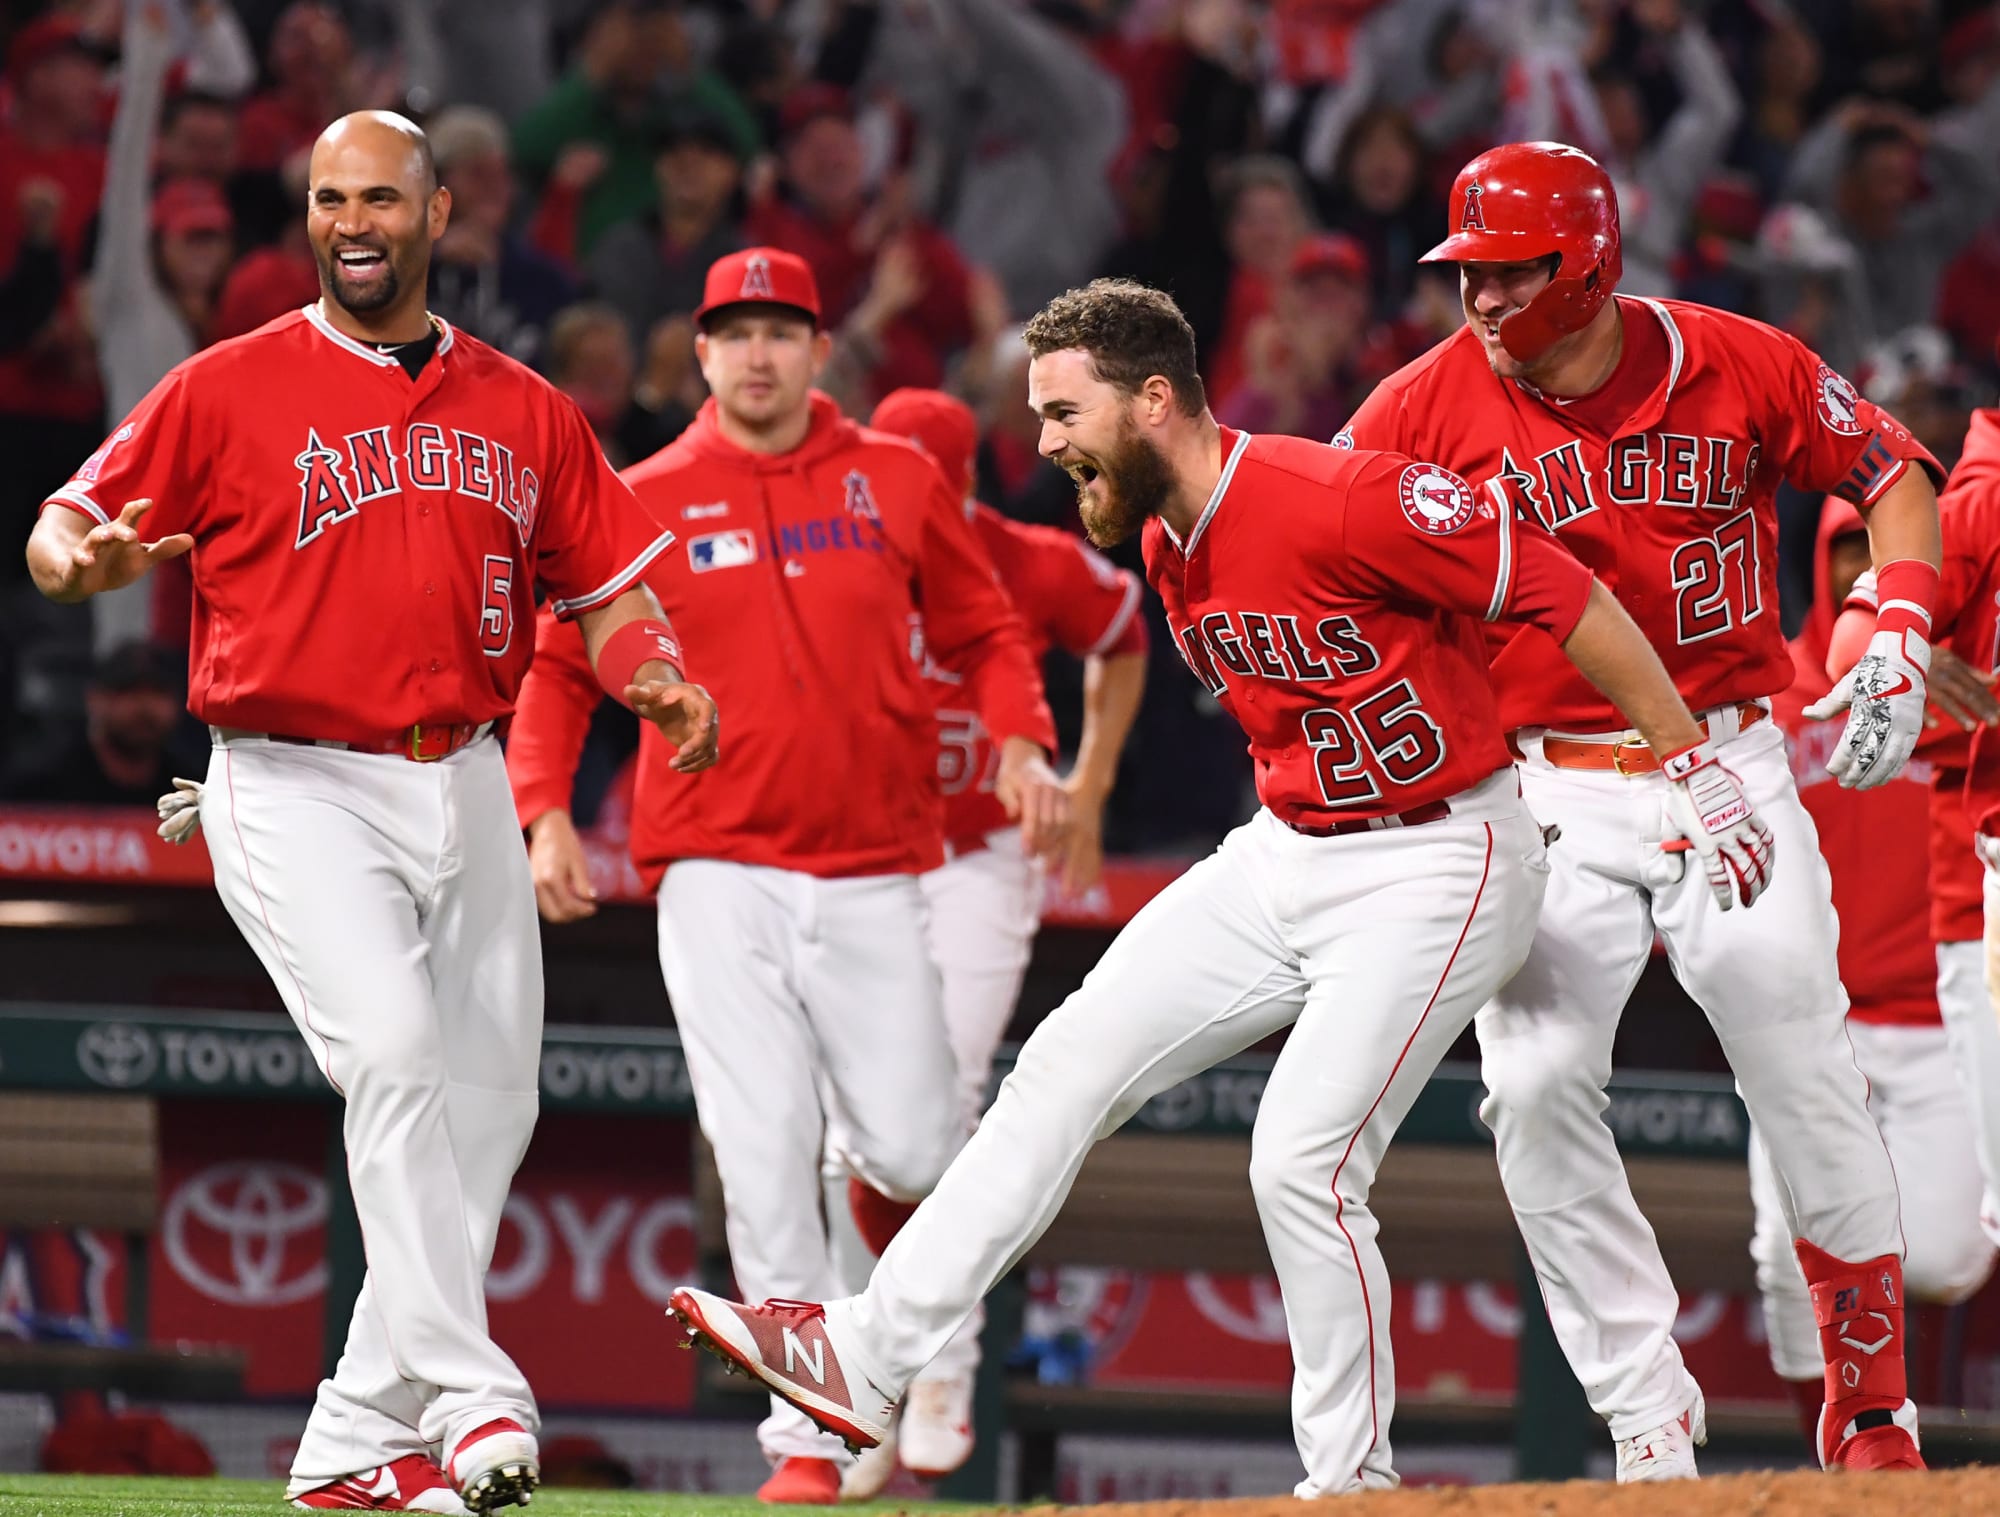 LA Angels: Counting down the best walk-off wins of 2019